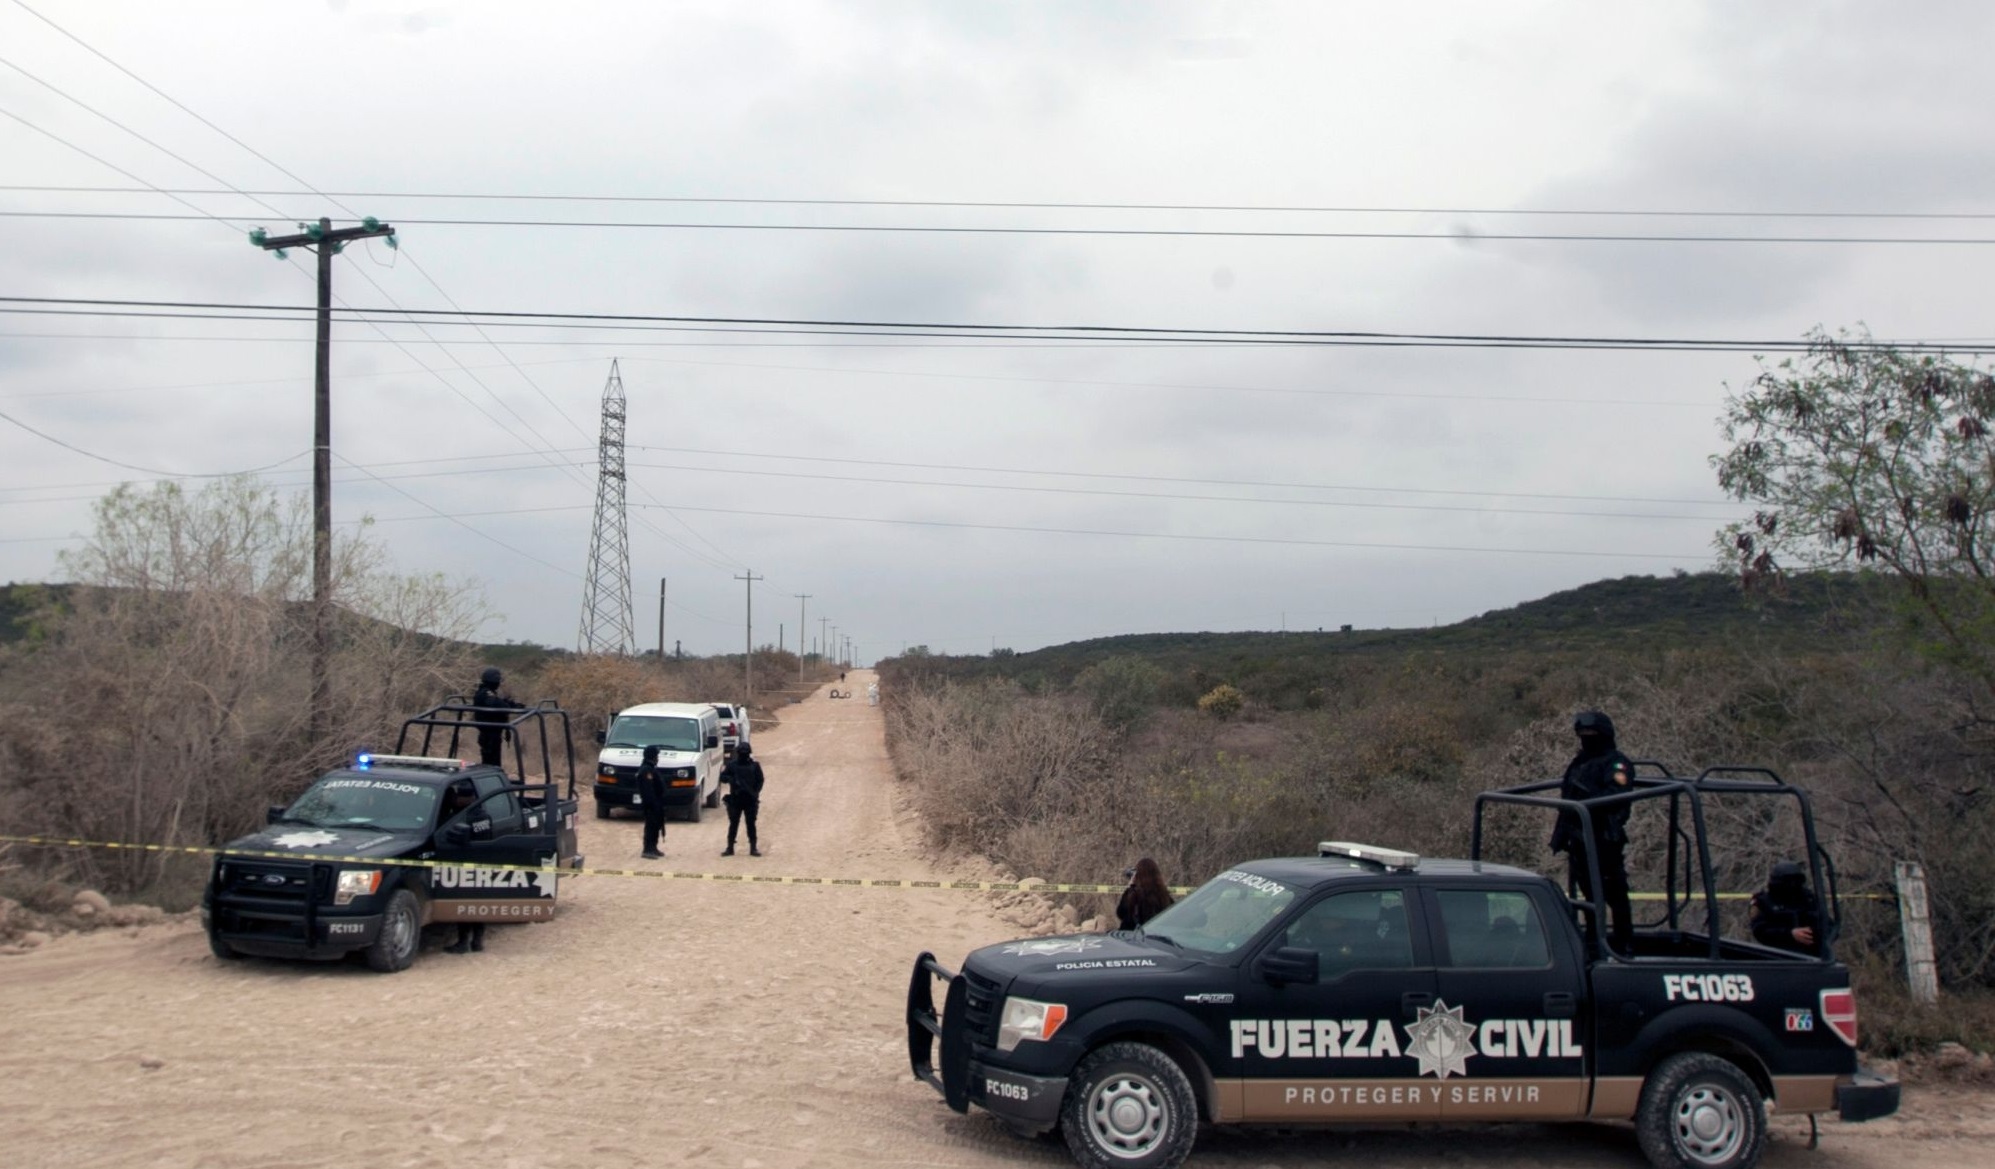 Armed confrontation with police leaves 10 criminals dead in northern Mexico